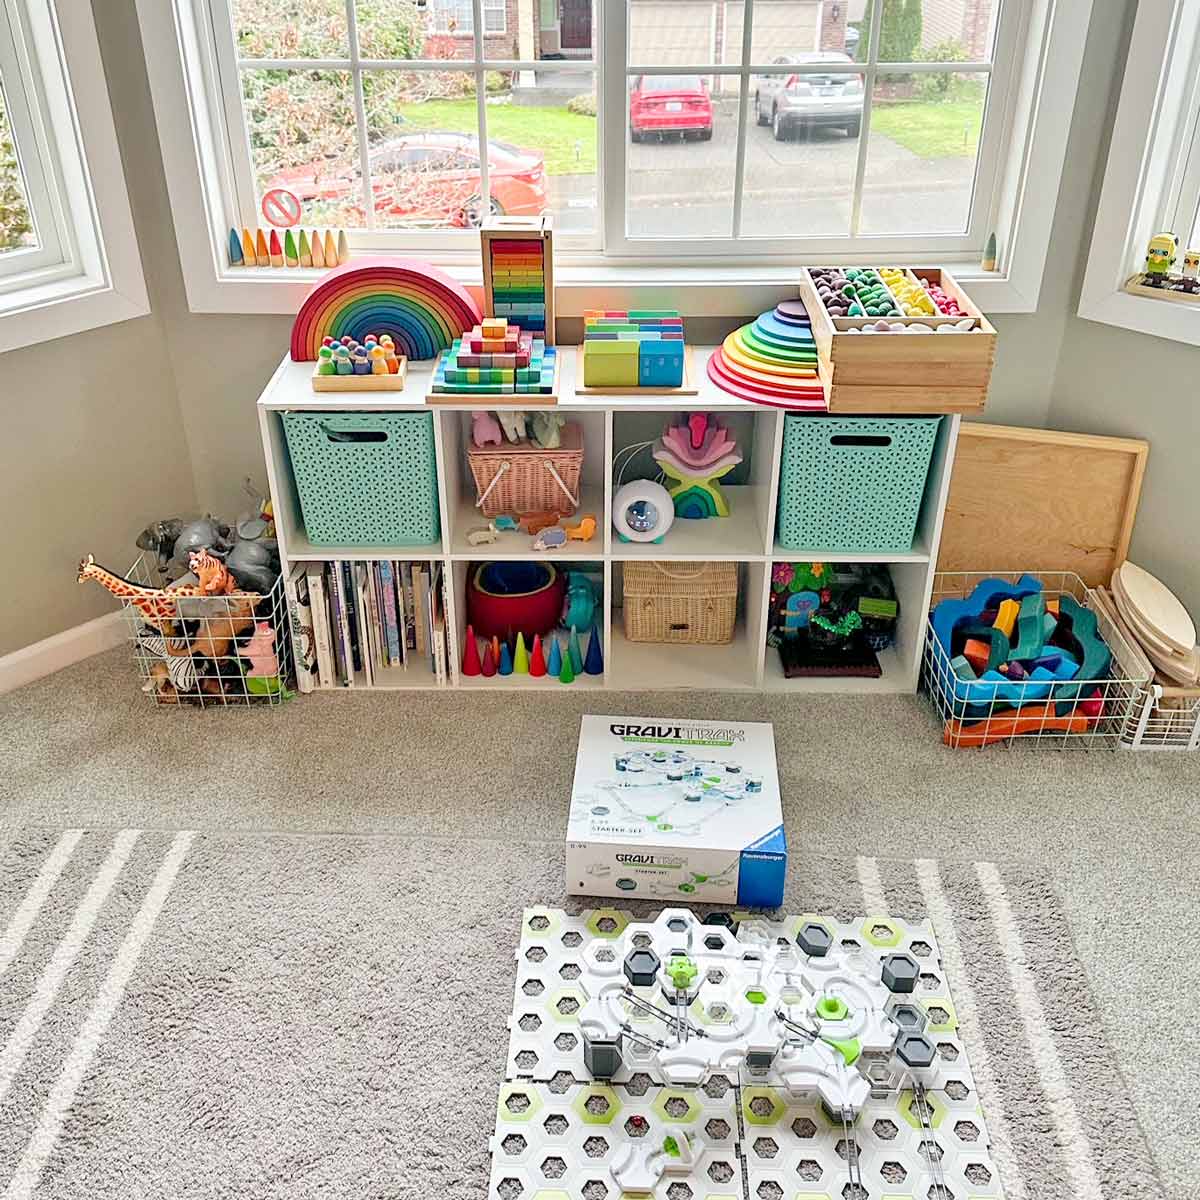 A child's bookshelf is pictured full of toys organized in plastic and win bins and baskets.